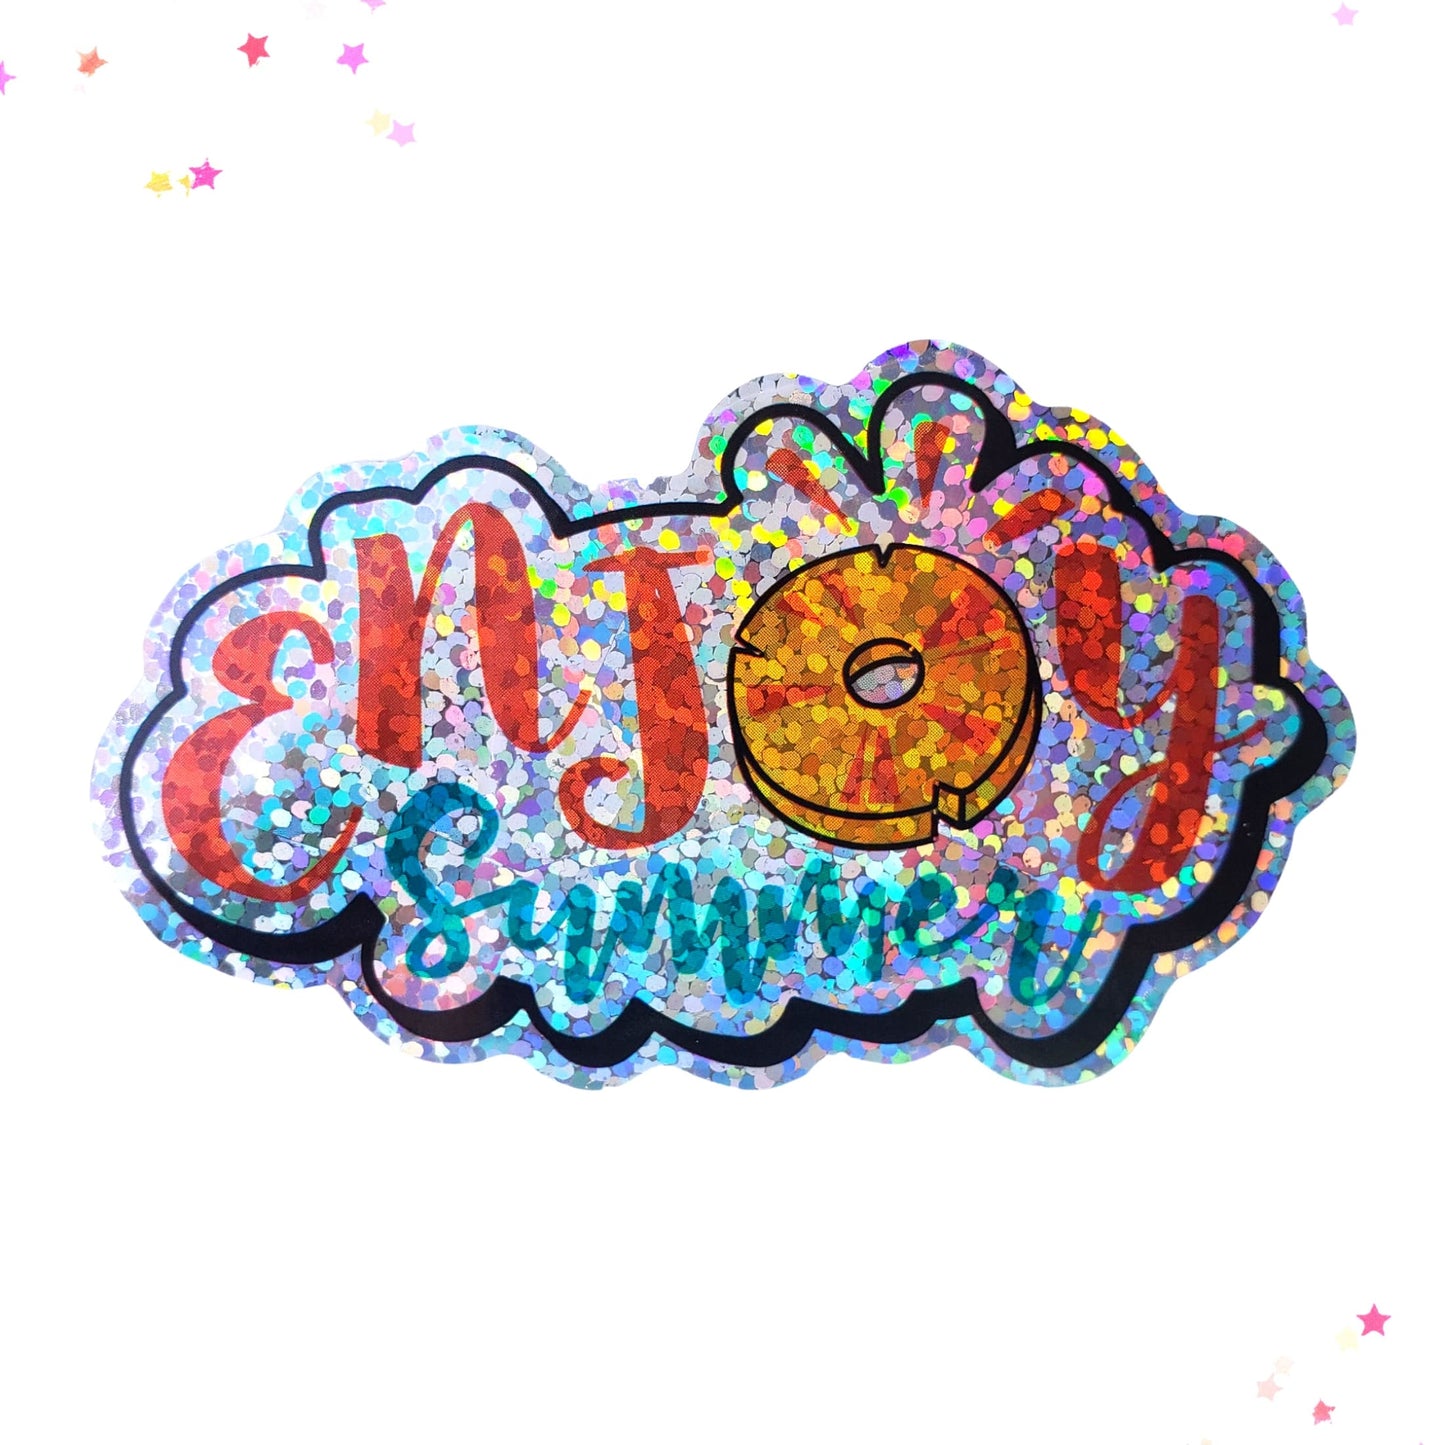 Premium Sticker - Sparkly Holographic Glitter Enjoy Summer from Confetti Kitty, Only 2.00